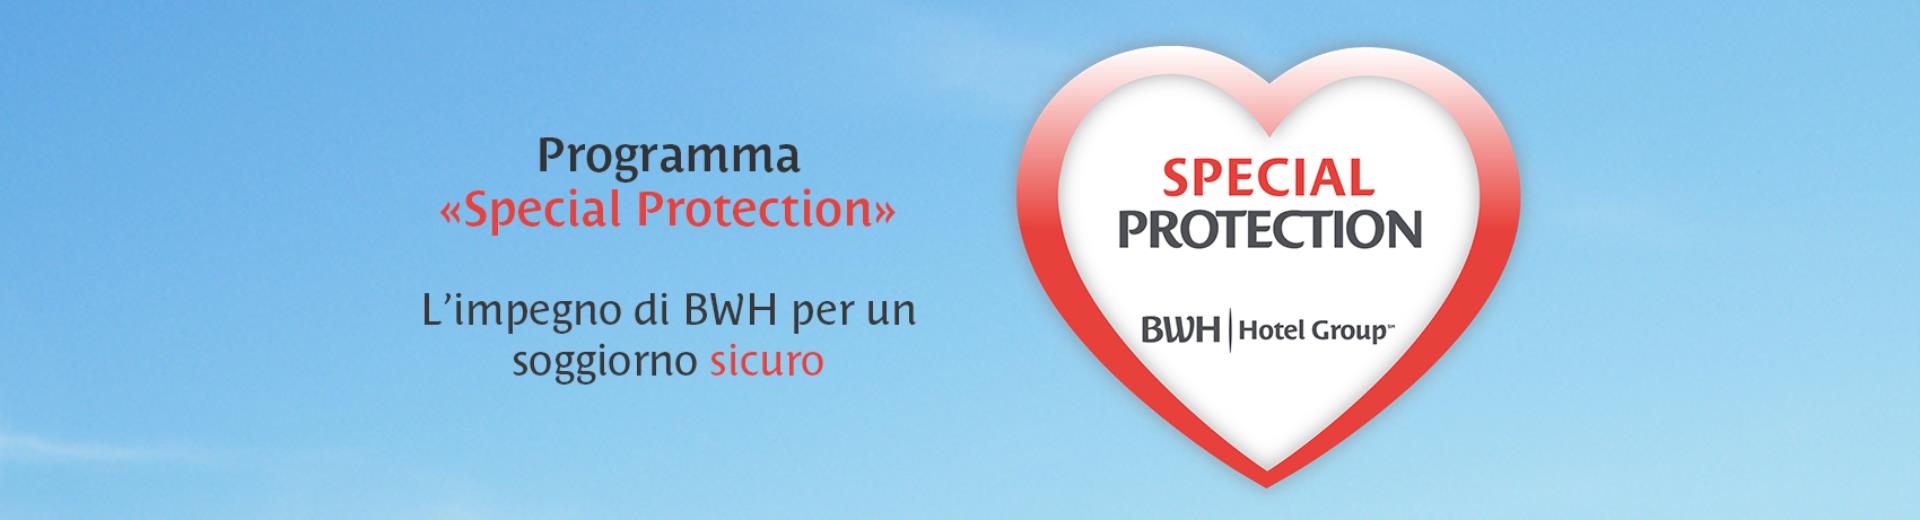 Special Protection - Tower Hotel Bologna